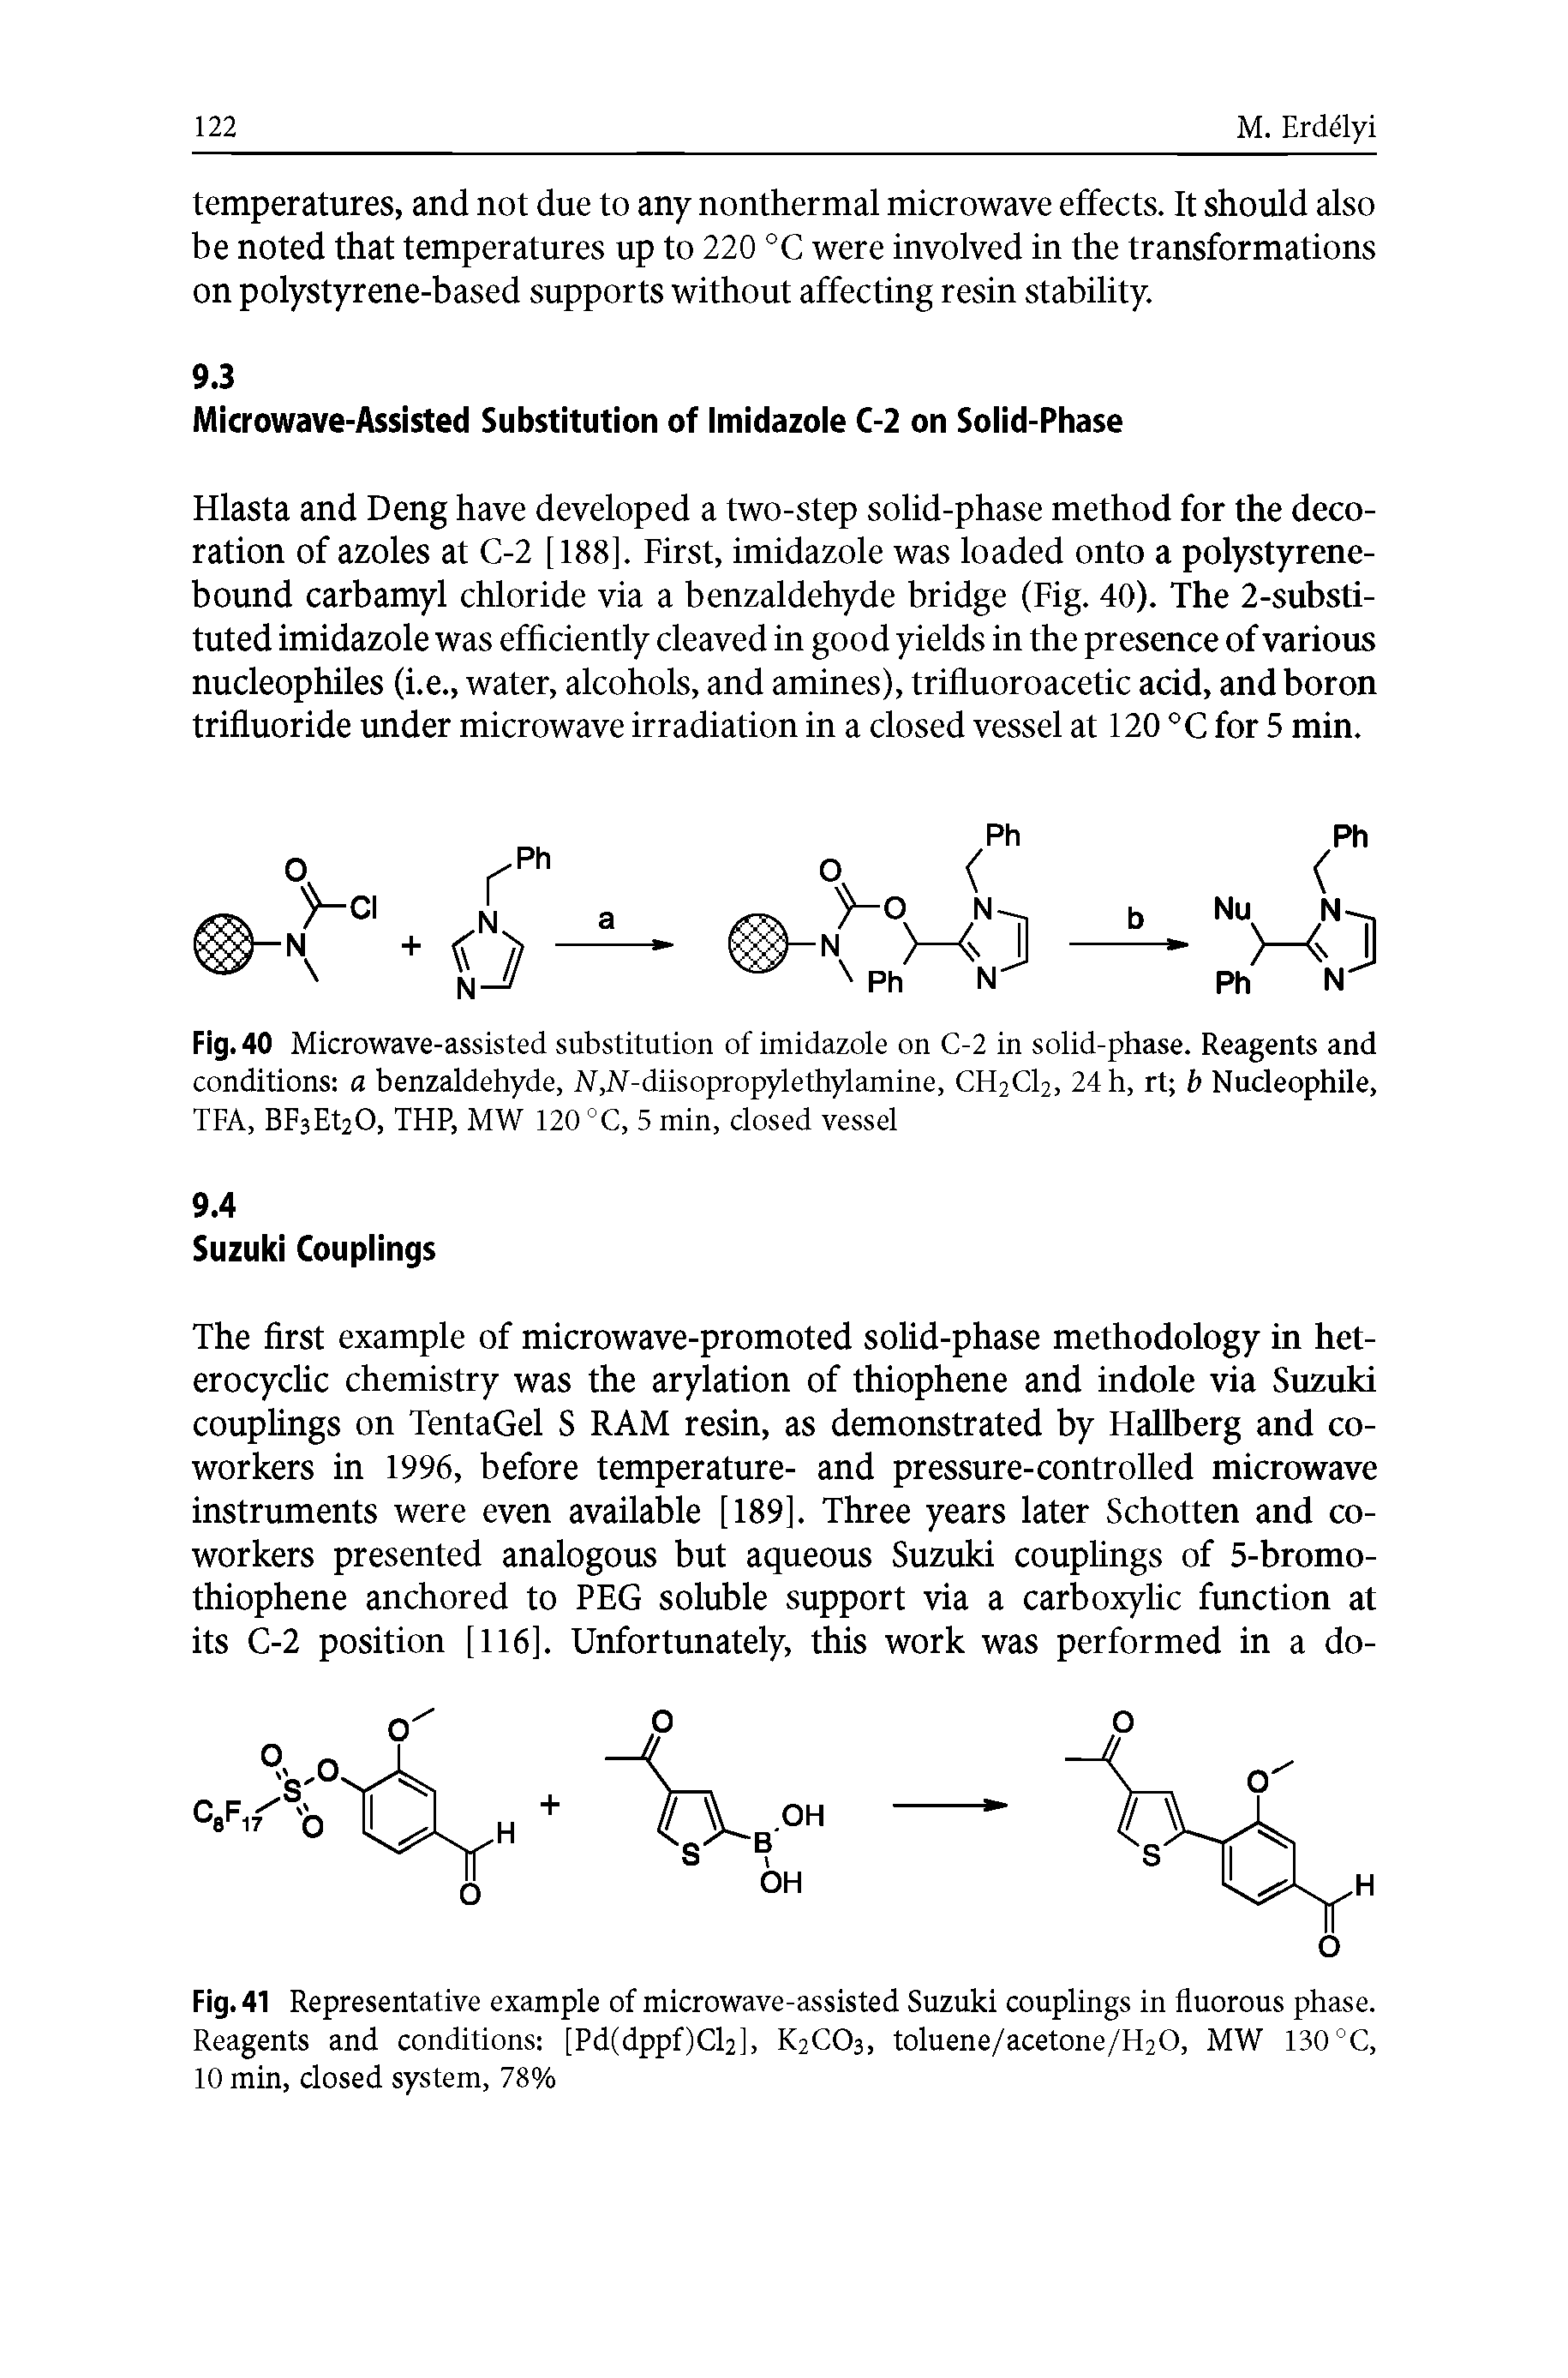 Fig. 40 Microwave-assisted substitution of imidazole on C-2 in solid-phase. Reagents and conditions a benzaldehyde, N,N-diisopropylethylamine, CH2CI2, 24 h, rt b Nucleophile, TEA, Bp3Et20, THP, MW 120 °C, 5 min, closed vessel...